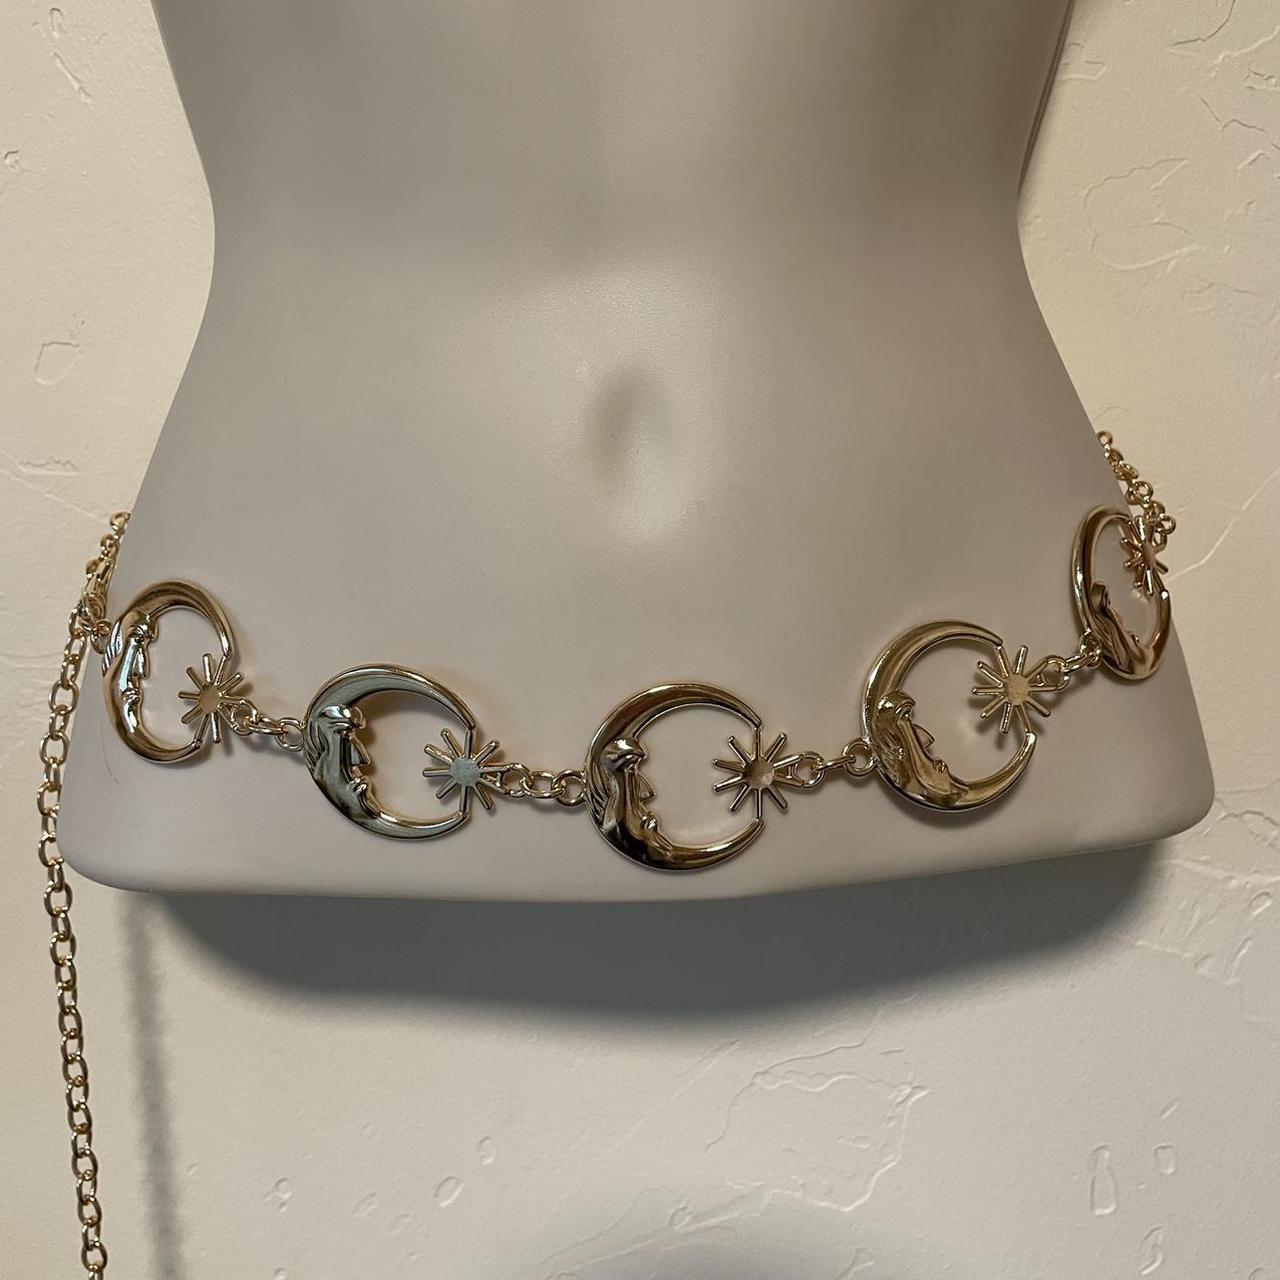 Celestial Moon and Starburst Chain Belt -gold toned...